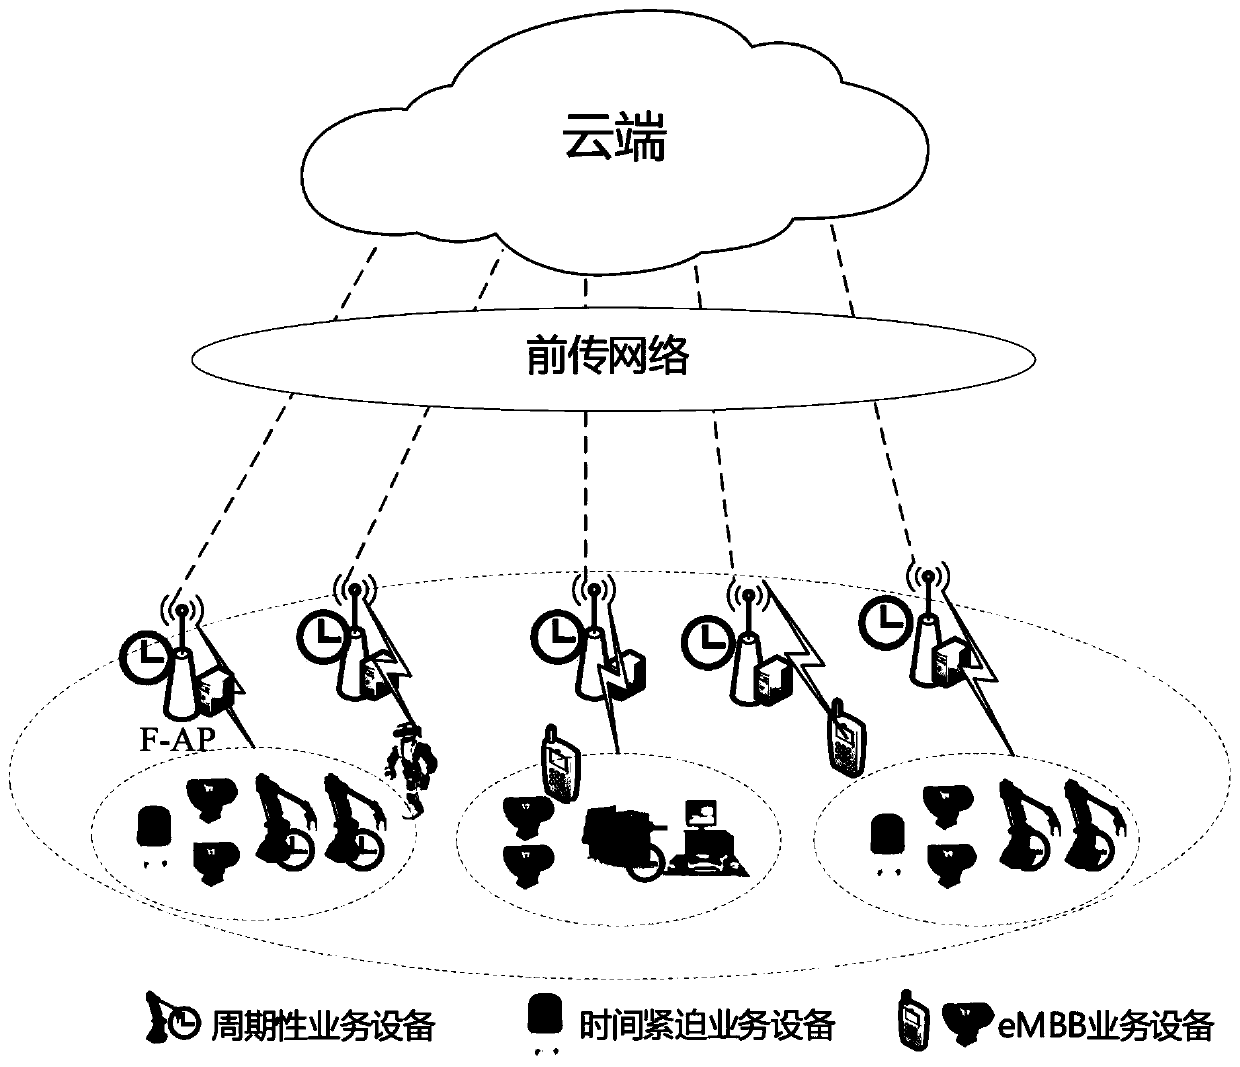 Fog computing Internet of Things networking method based on time delay perception